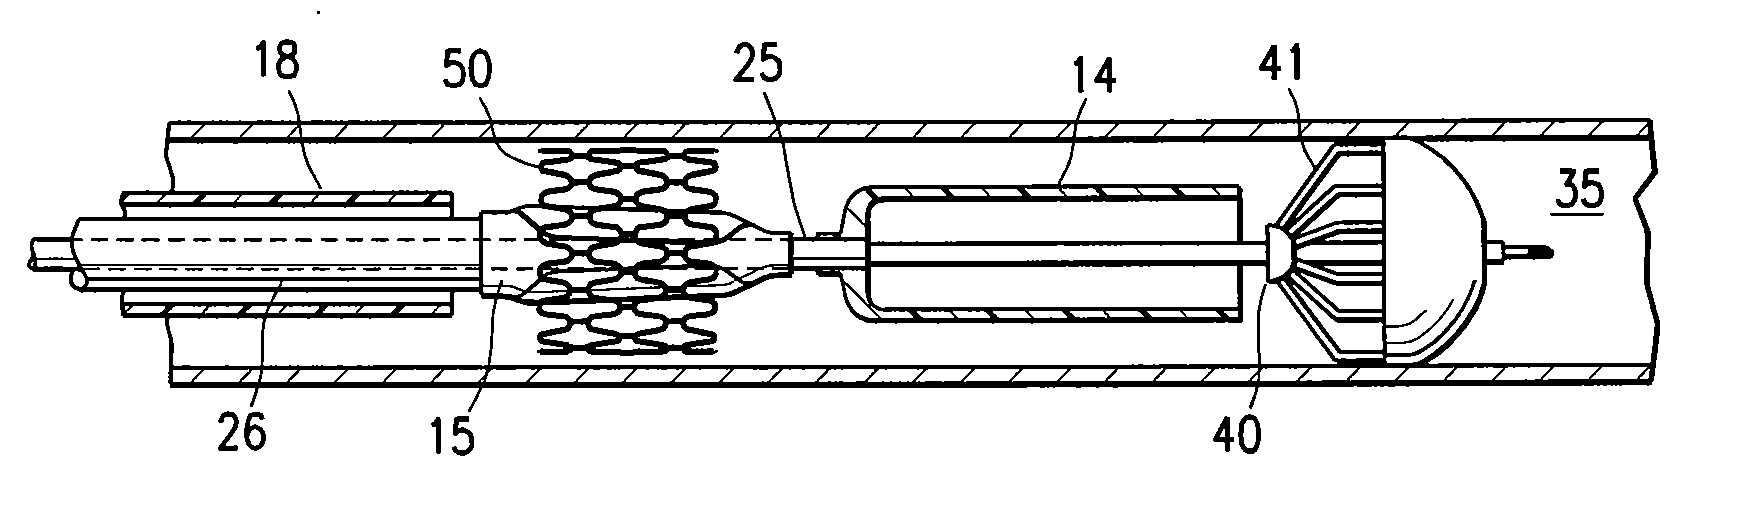 Highly trackable balloon catheter system and method for collapsing an expanded medical device